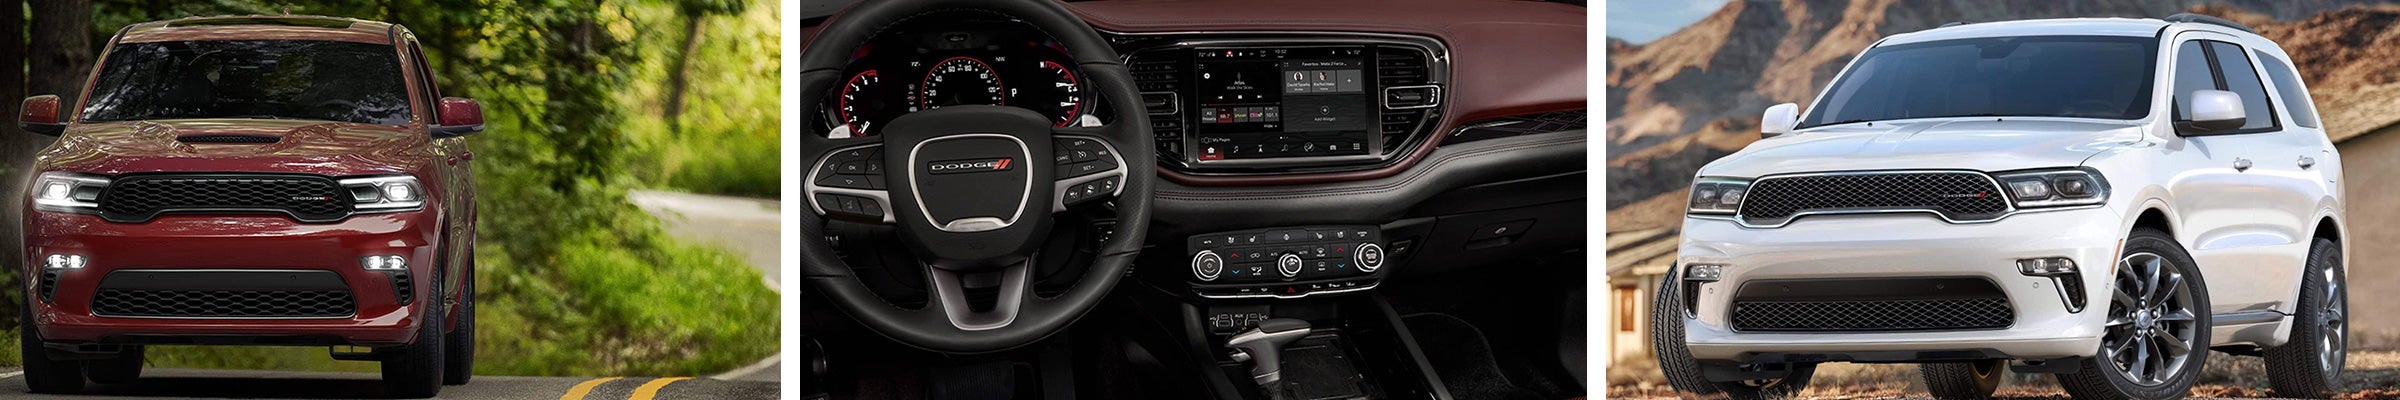 2022 Dodge Durango For Sale Monroeville PA | Pittsburgh